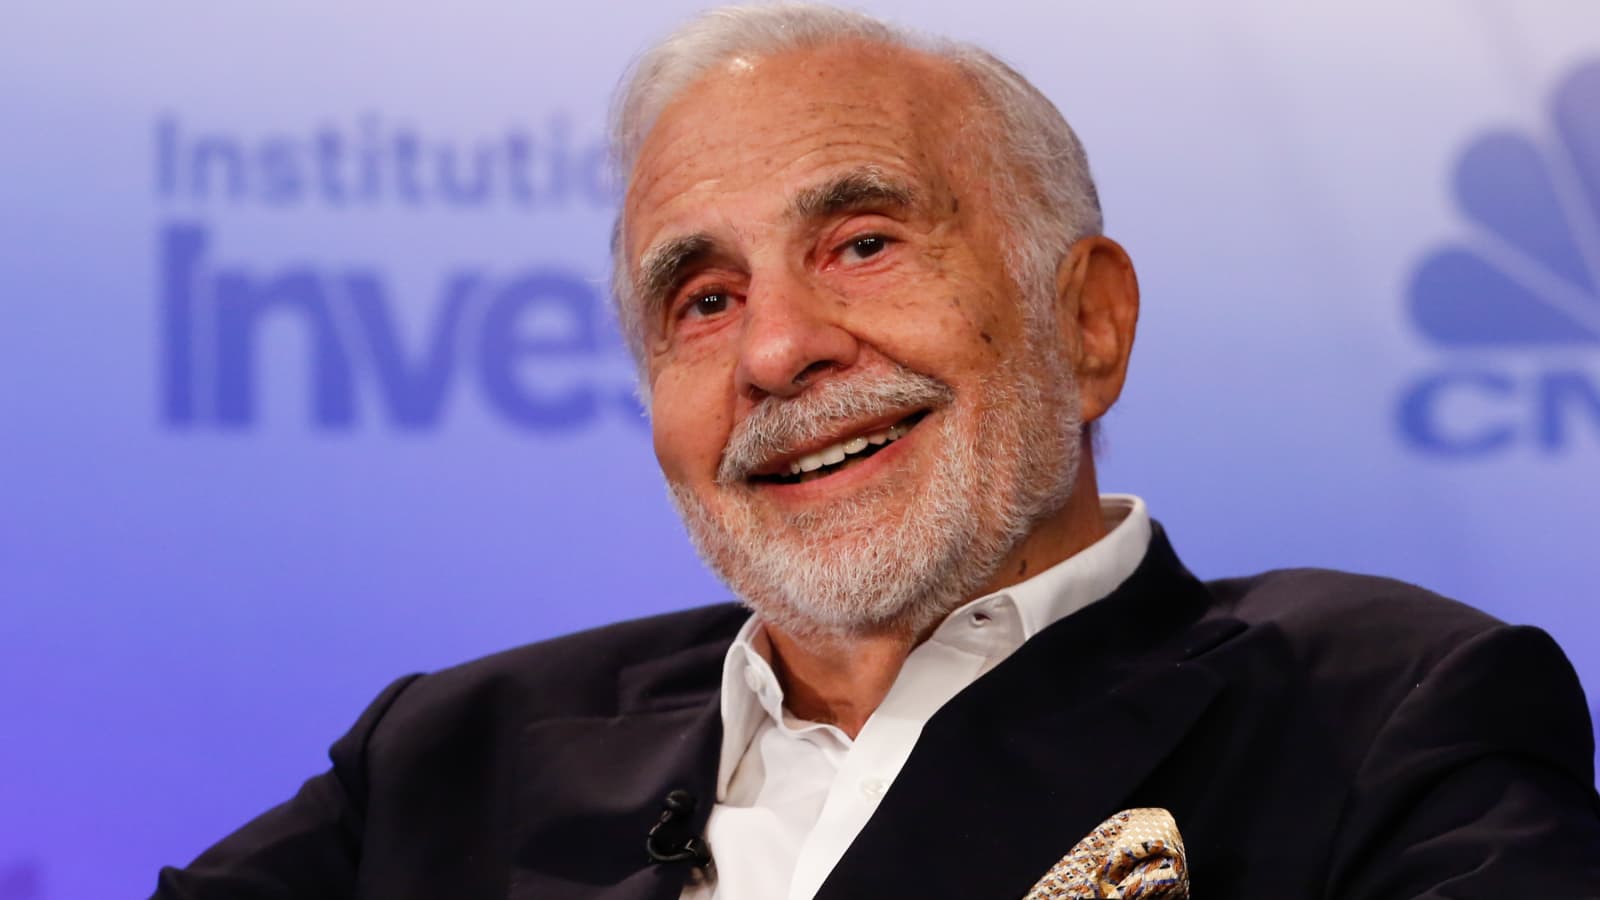 20 Interesting Facts About Carl Icahn - Carl Icahn NET WORTH